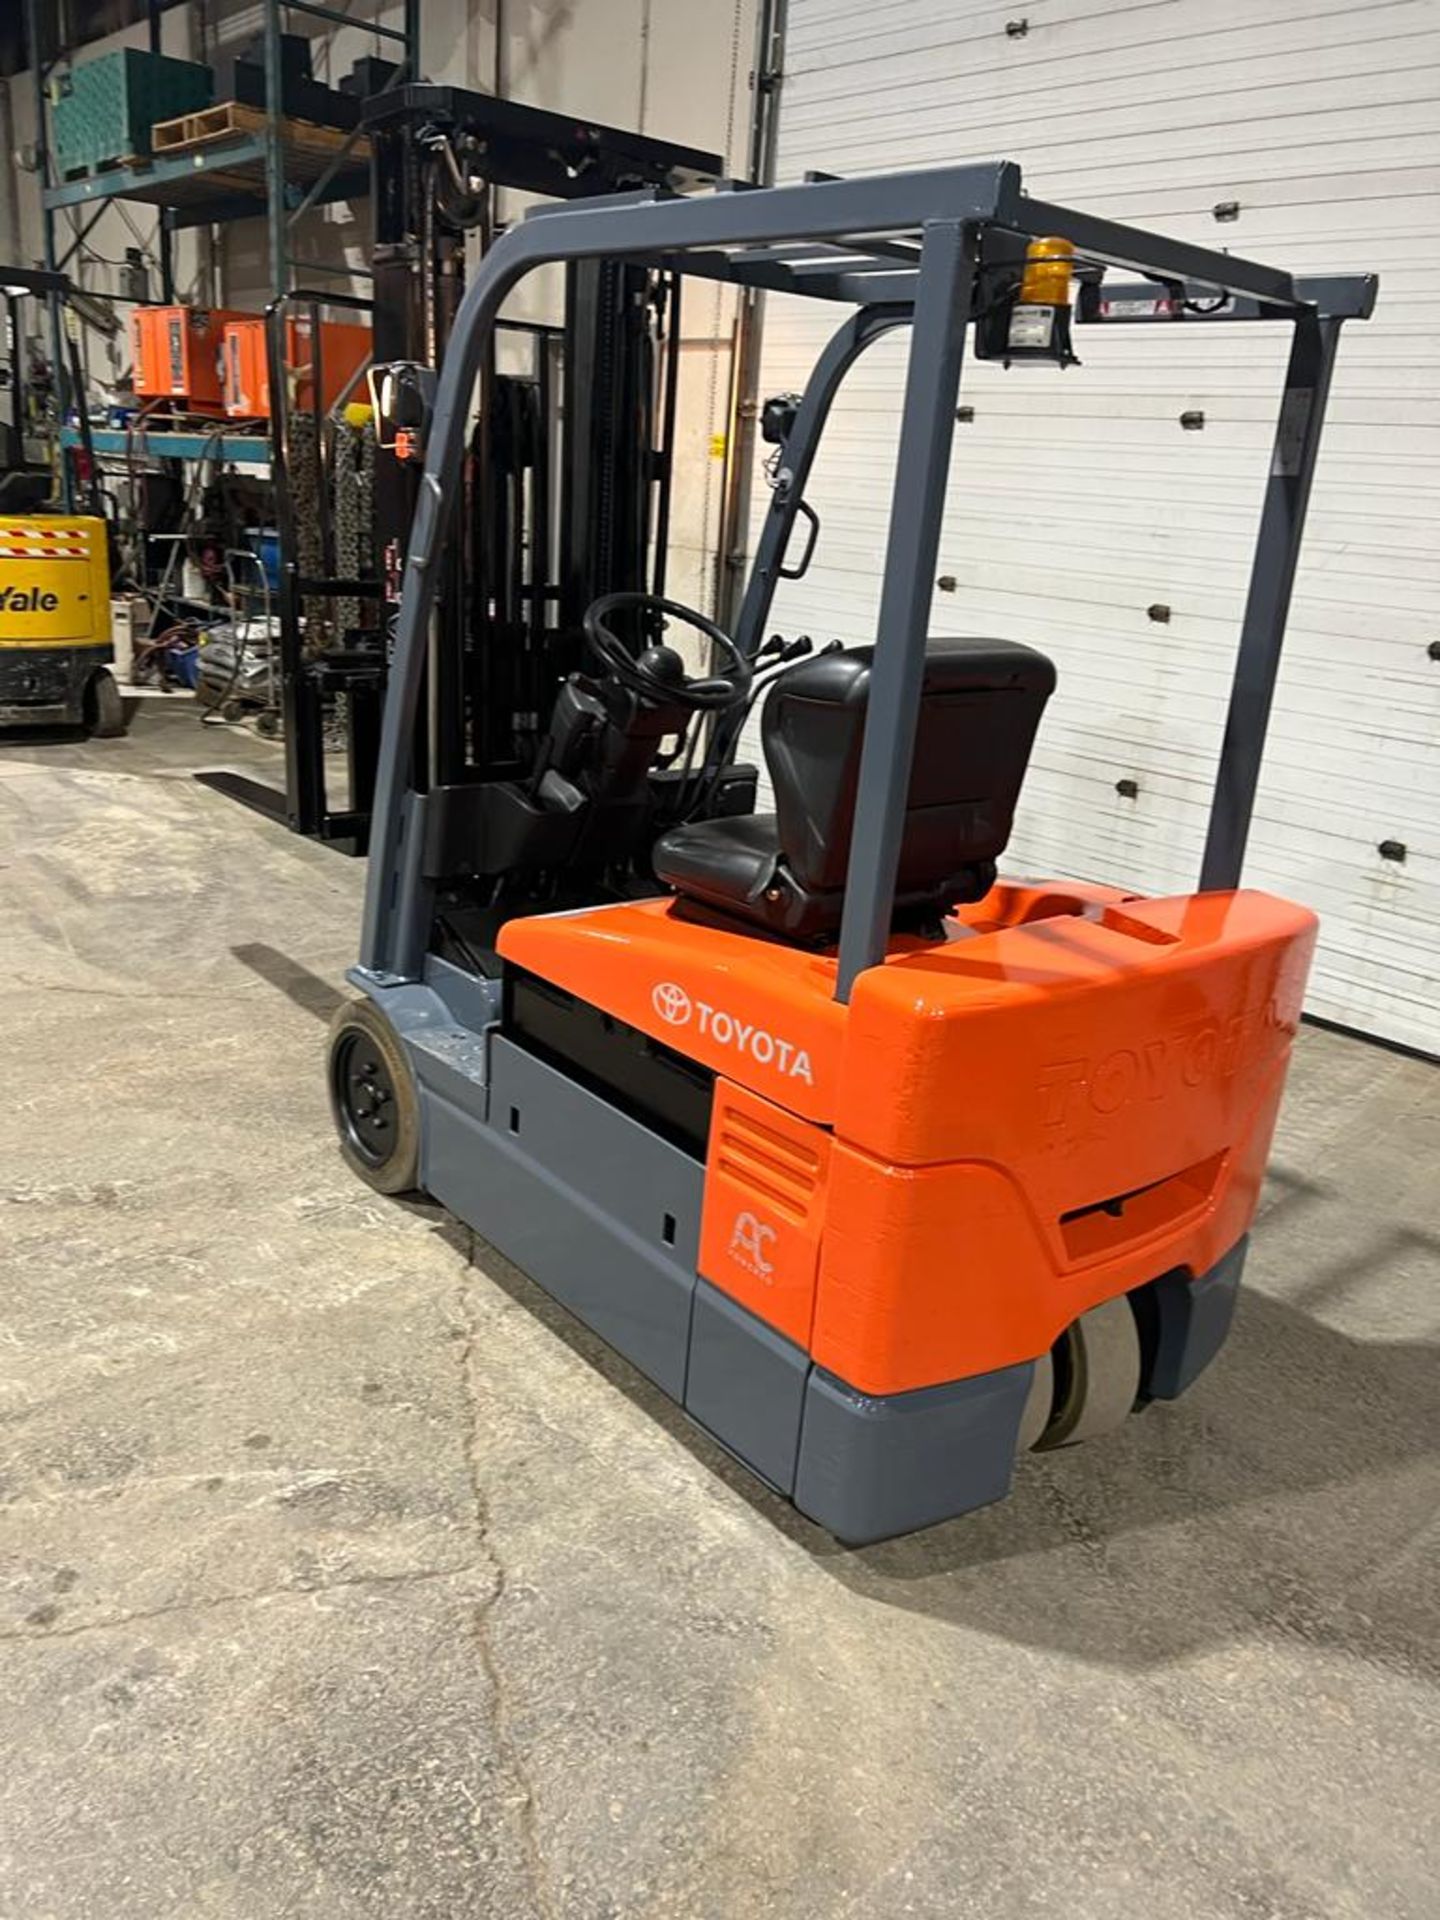 NICE Toyota 3,250lbs Capacity Forklift 3-wheel Electric with SIDESHIFT, 3-stage Mast 36V - FREE - Image 4 of 4